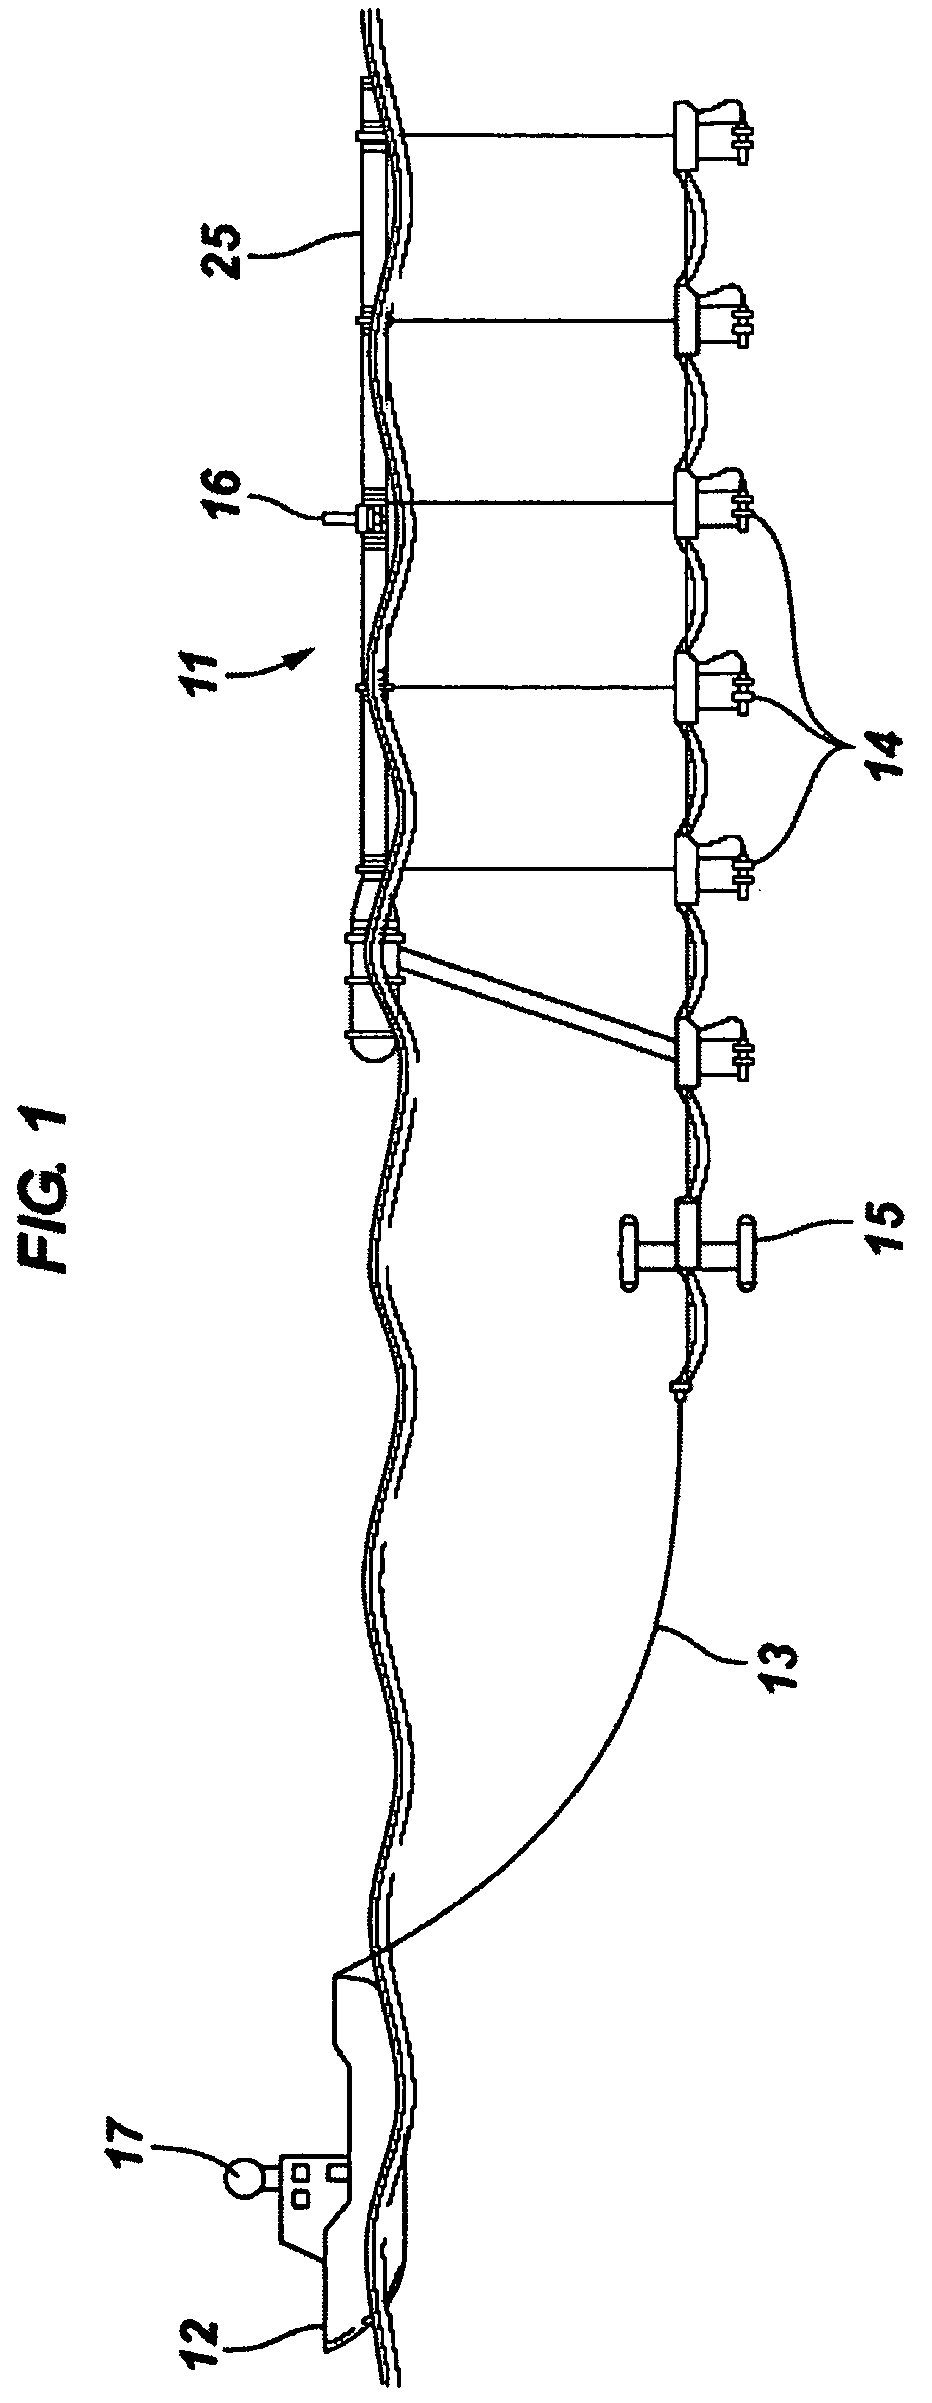 Systems and methods for steering seismic arrays